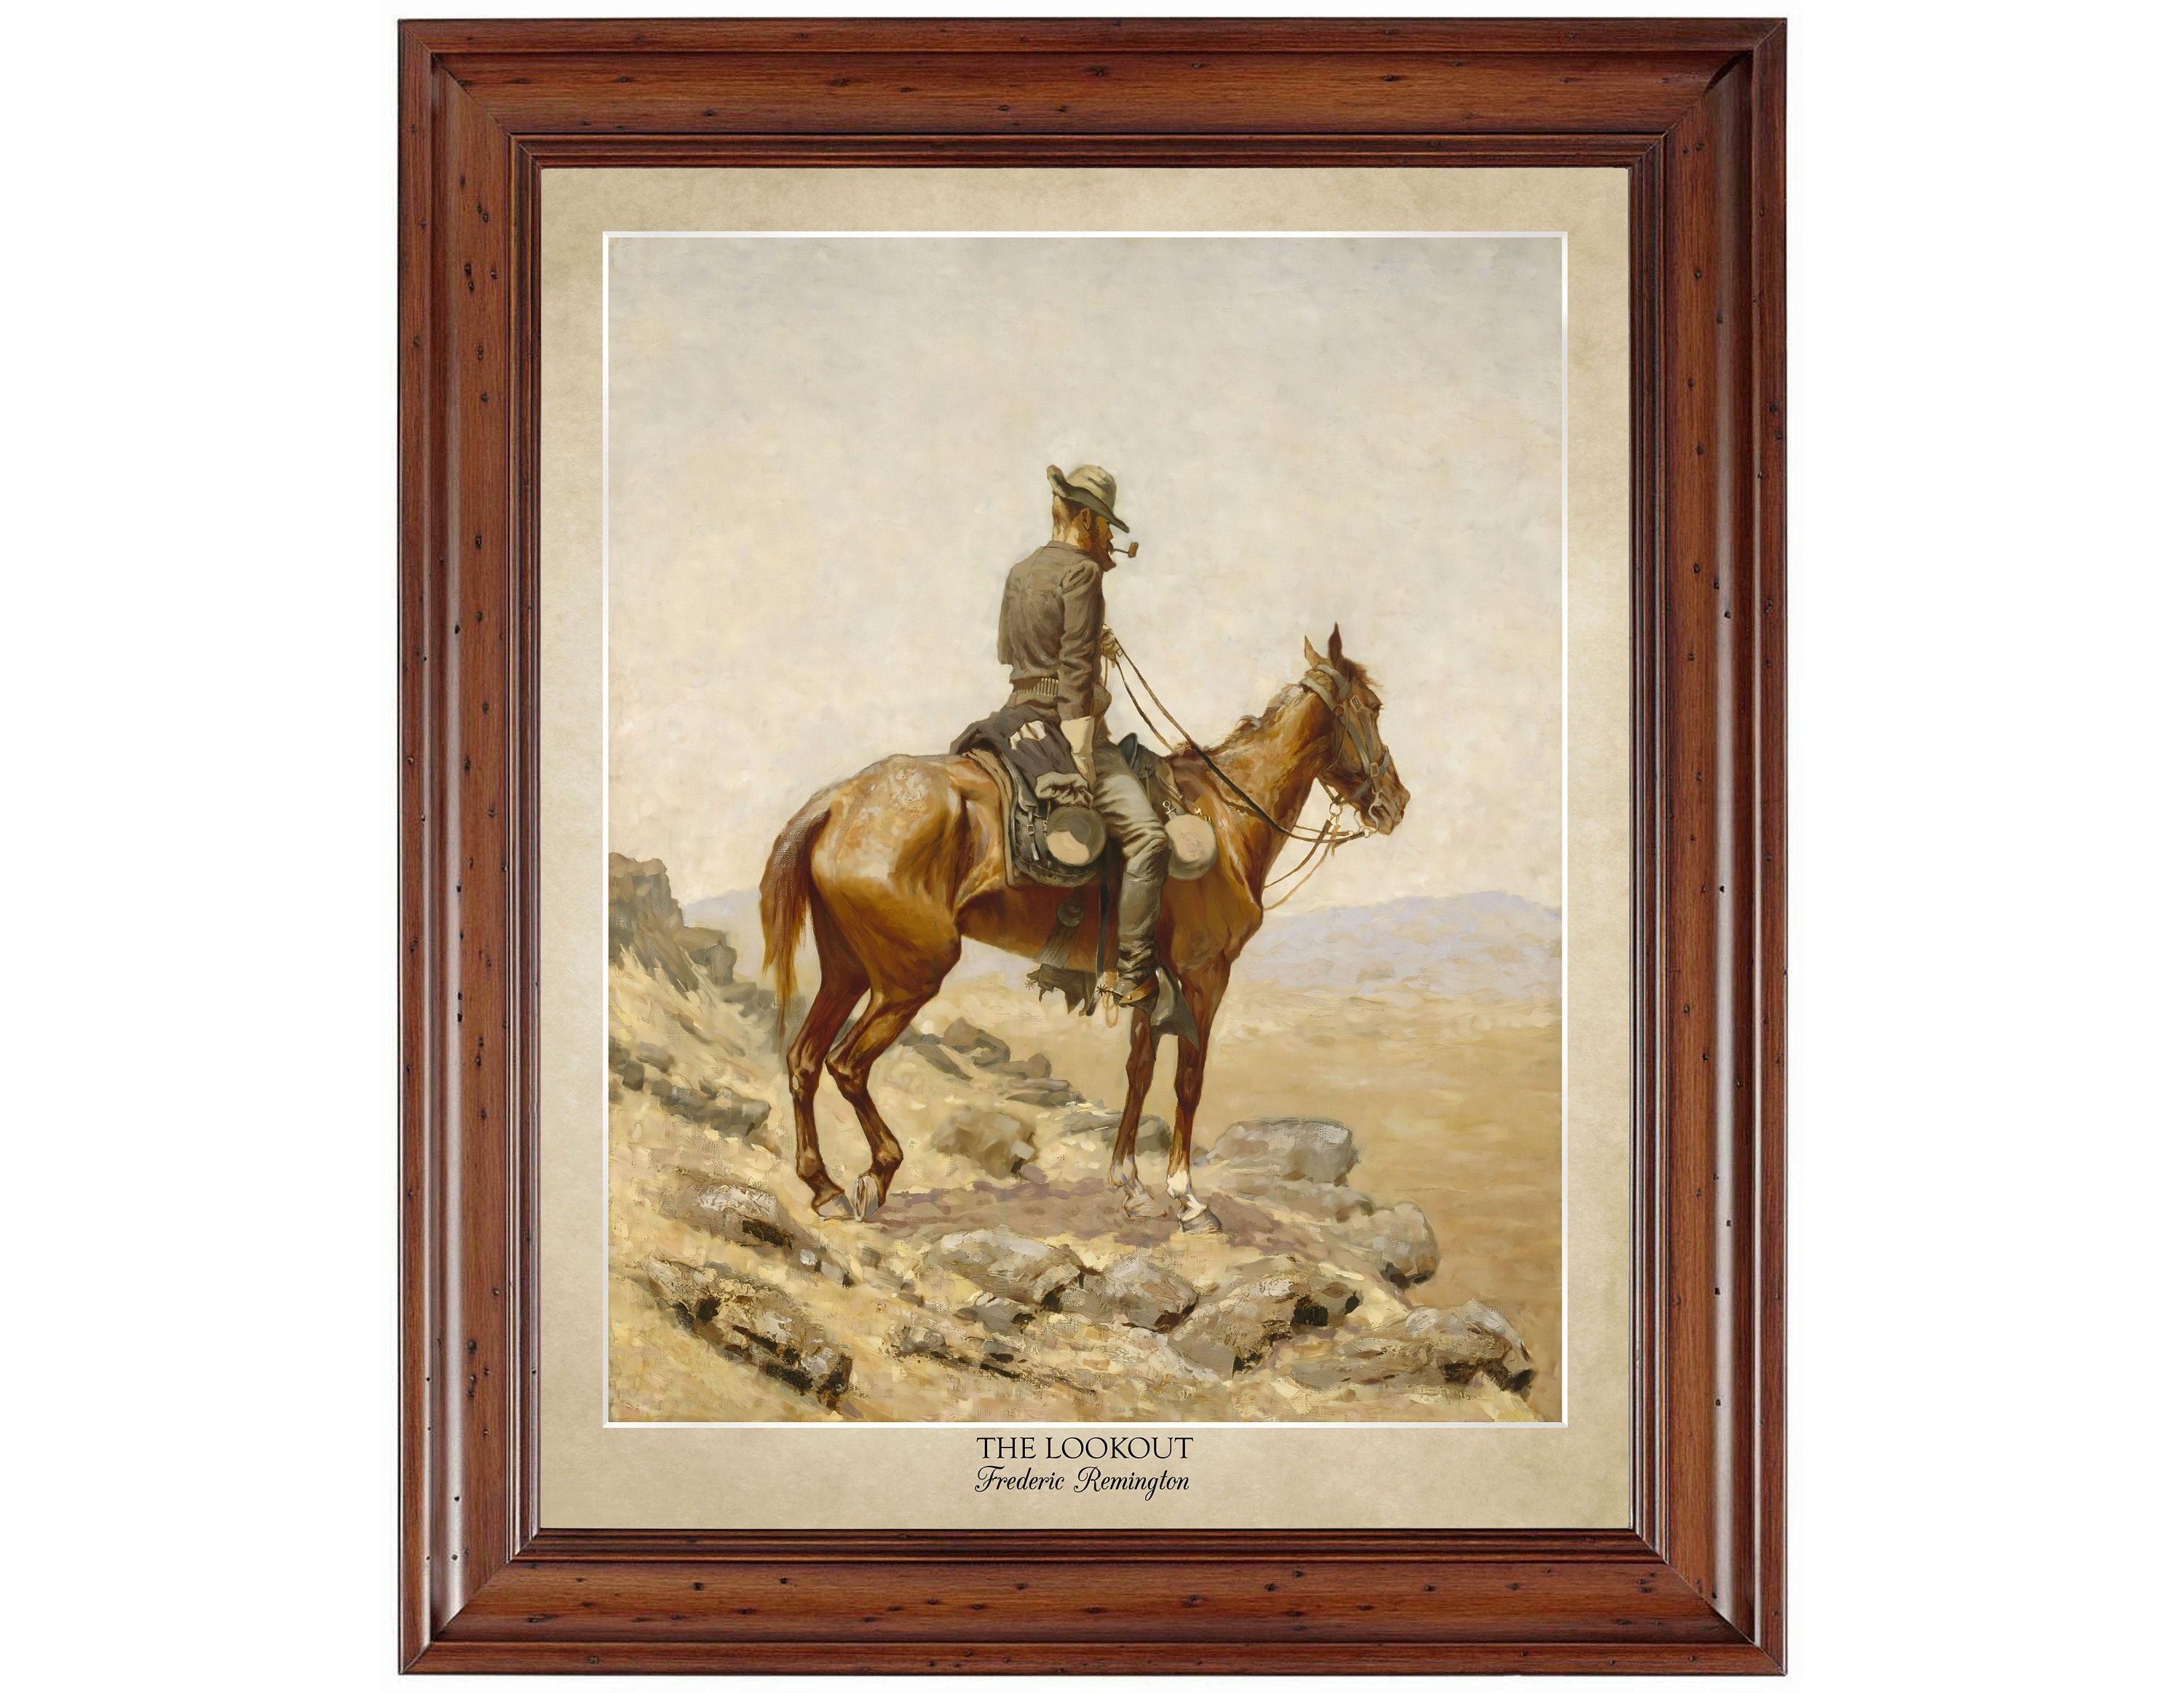 The Lookout by Frederic Remington (1887); 18x24" print displaying the artist's name and title of painting (does not include frame)